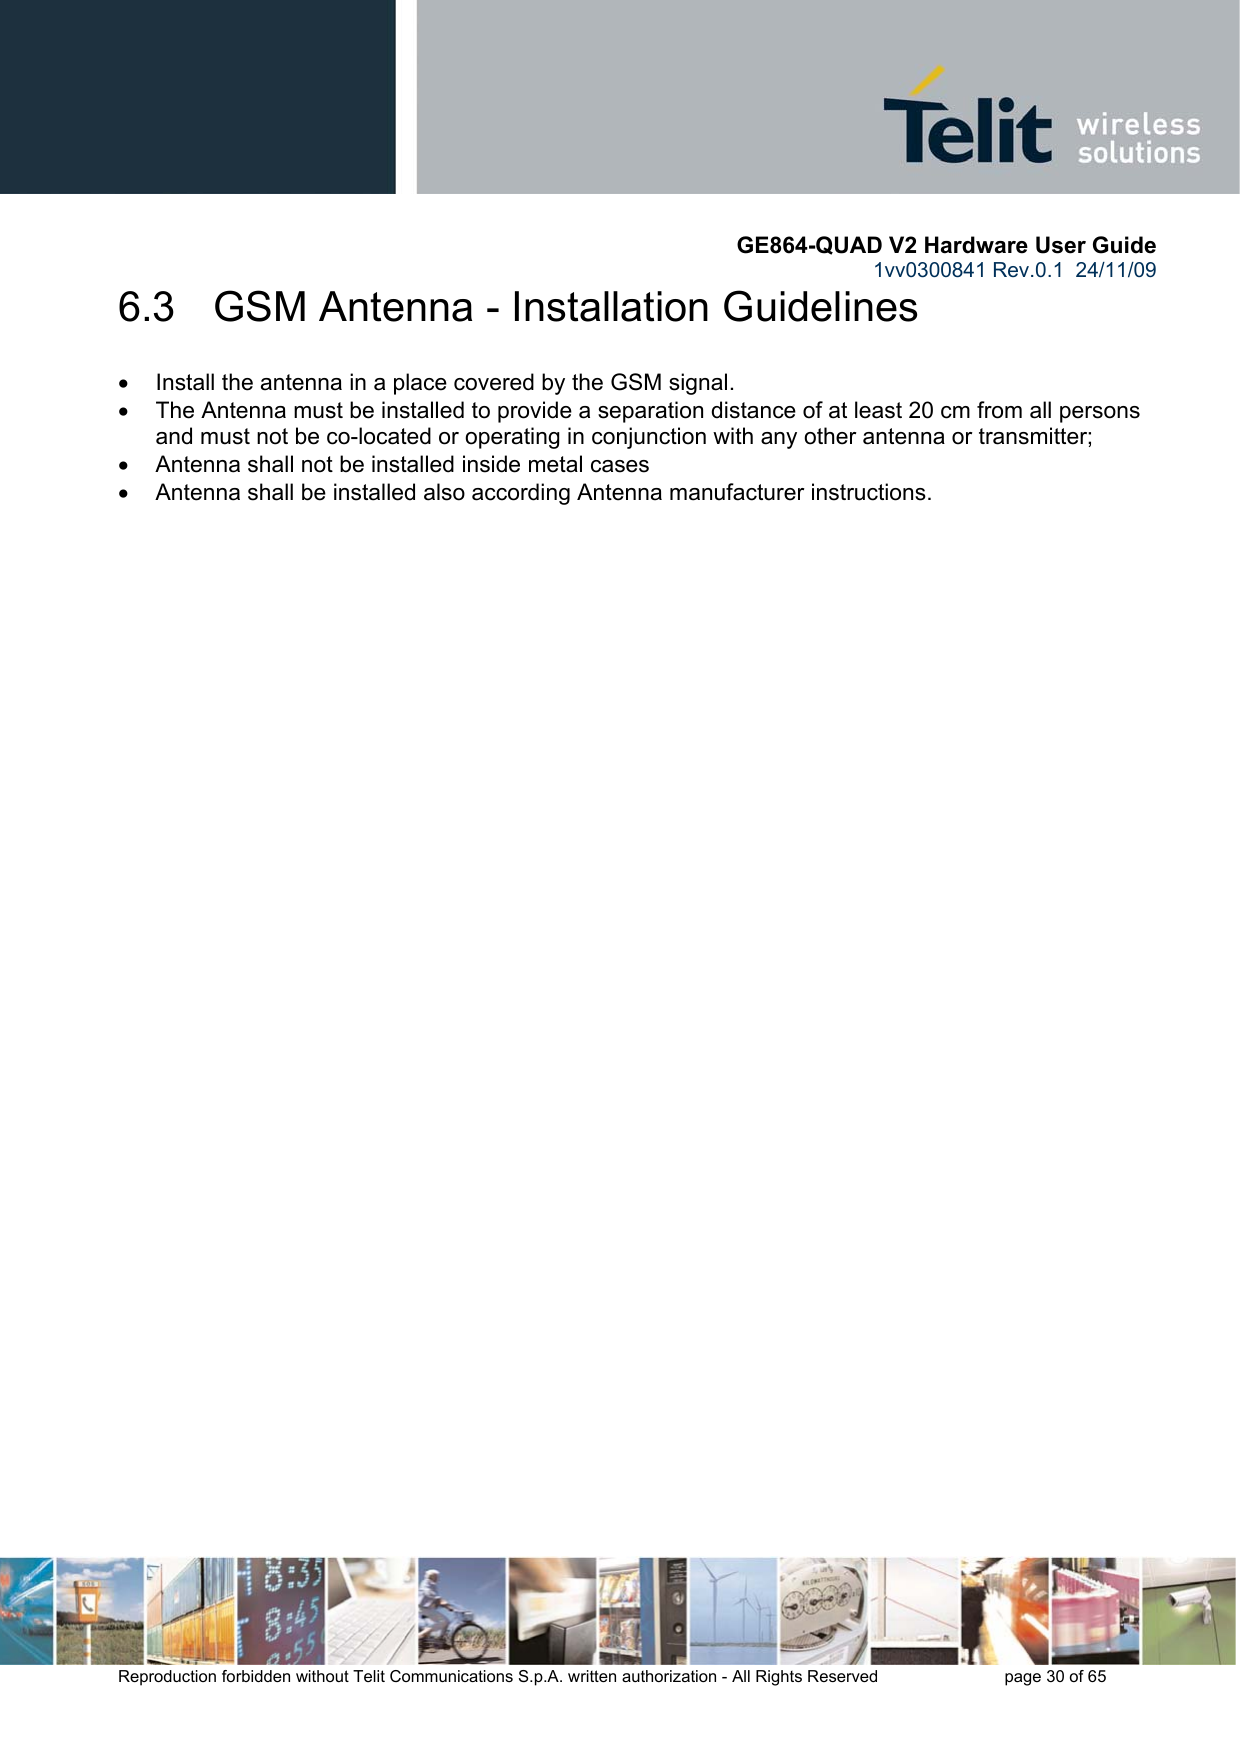       GE864-QUAD V2 Hardware User Guide 1vv0300841 Rev.0.1  24/11/09      Reproduction forbidden without Telit Communications S.p.A. written authorization - All Rights Reserved    page 30 of 65  6.3   GSM Antenna - Installation Guidelines •  Install the antenna in a place covered by the GSM signal. •  The Antenna must be installed to provide a separation distance of at least 20 cm from all persons and must not be co-located or operating in conjunction with any other antenna or transmitter; •  Antenna shall not be installed inside metal cases  •  Antenna shall be installed also according Antenna manufacturer instructions.     